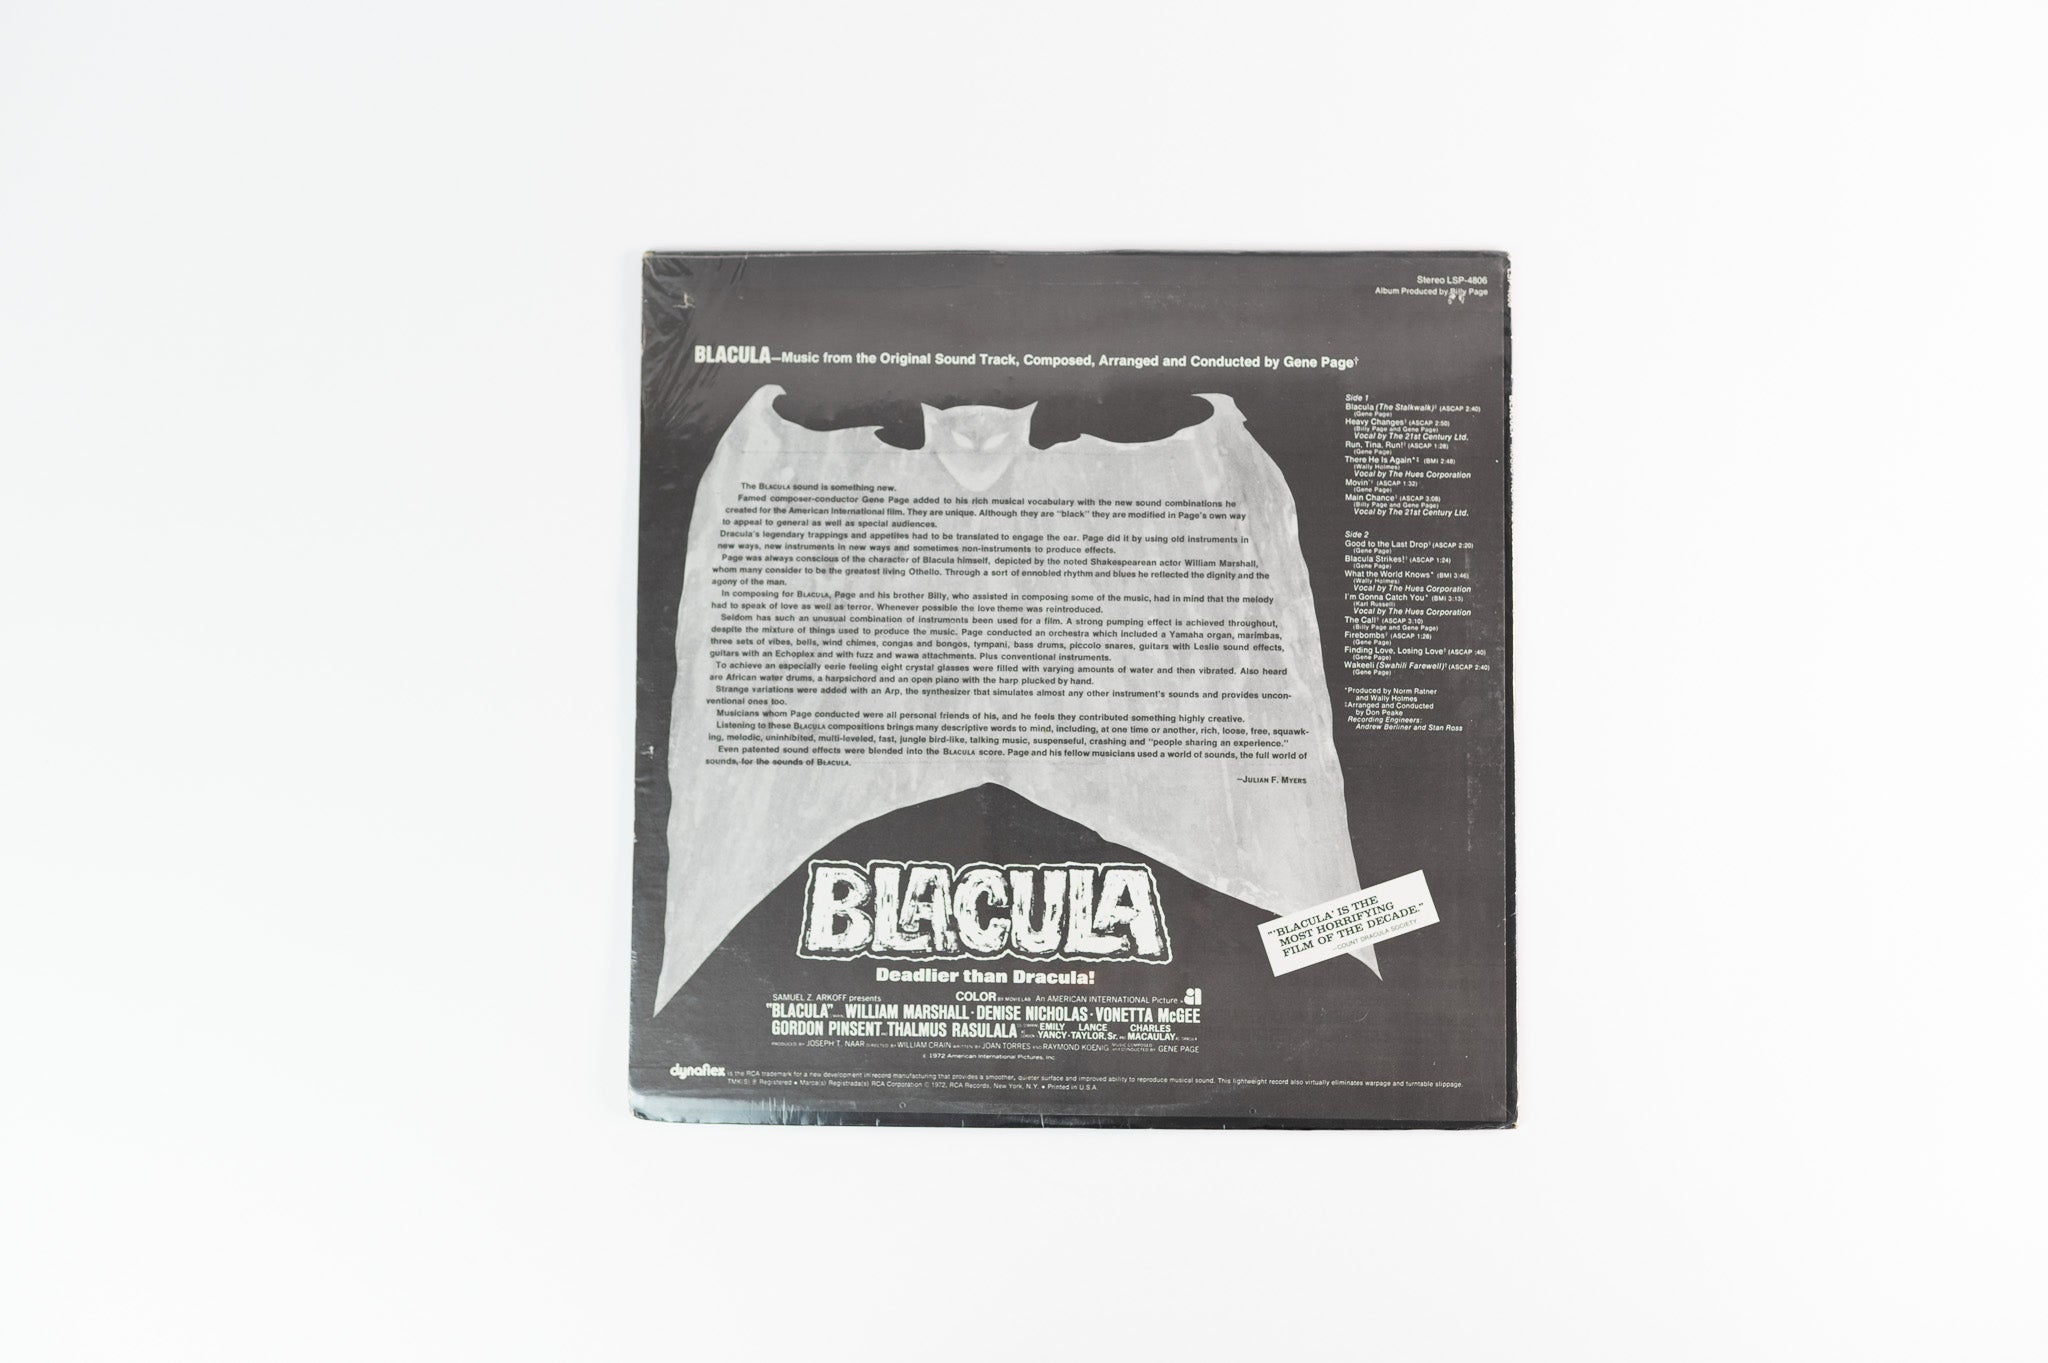 Gene Page - Blacula (Music From The Original Soundtrack) on RCA Sealed